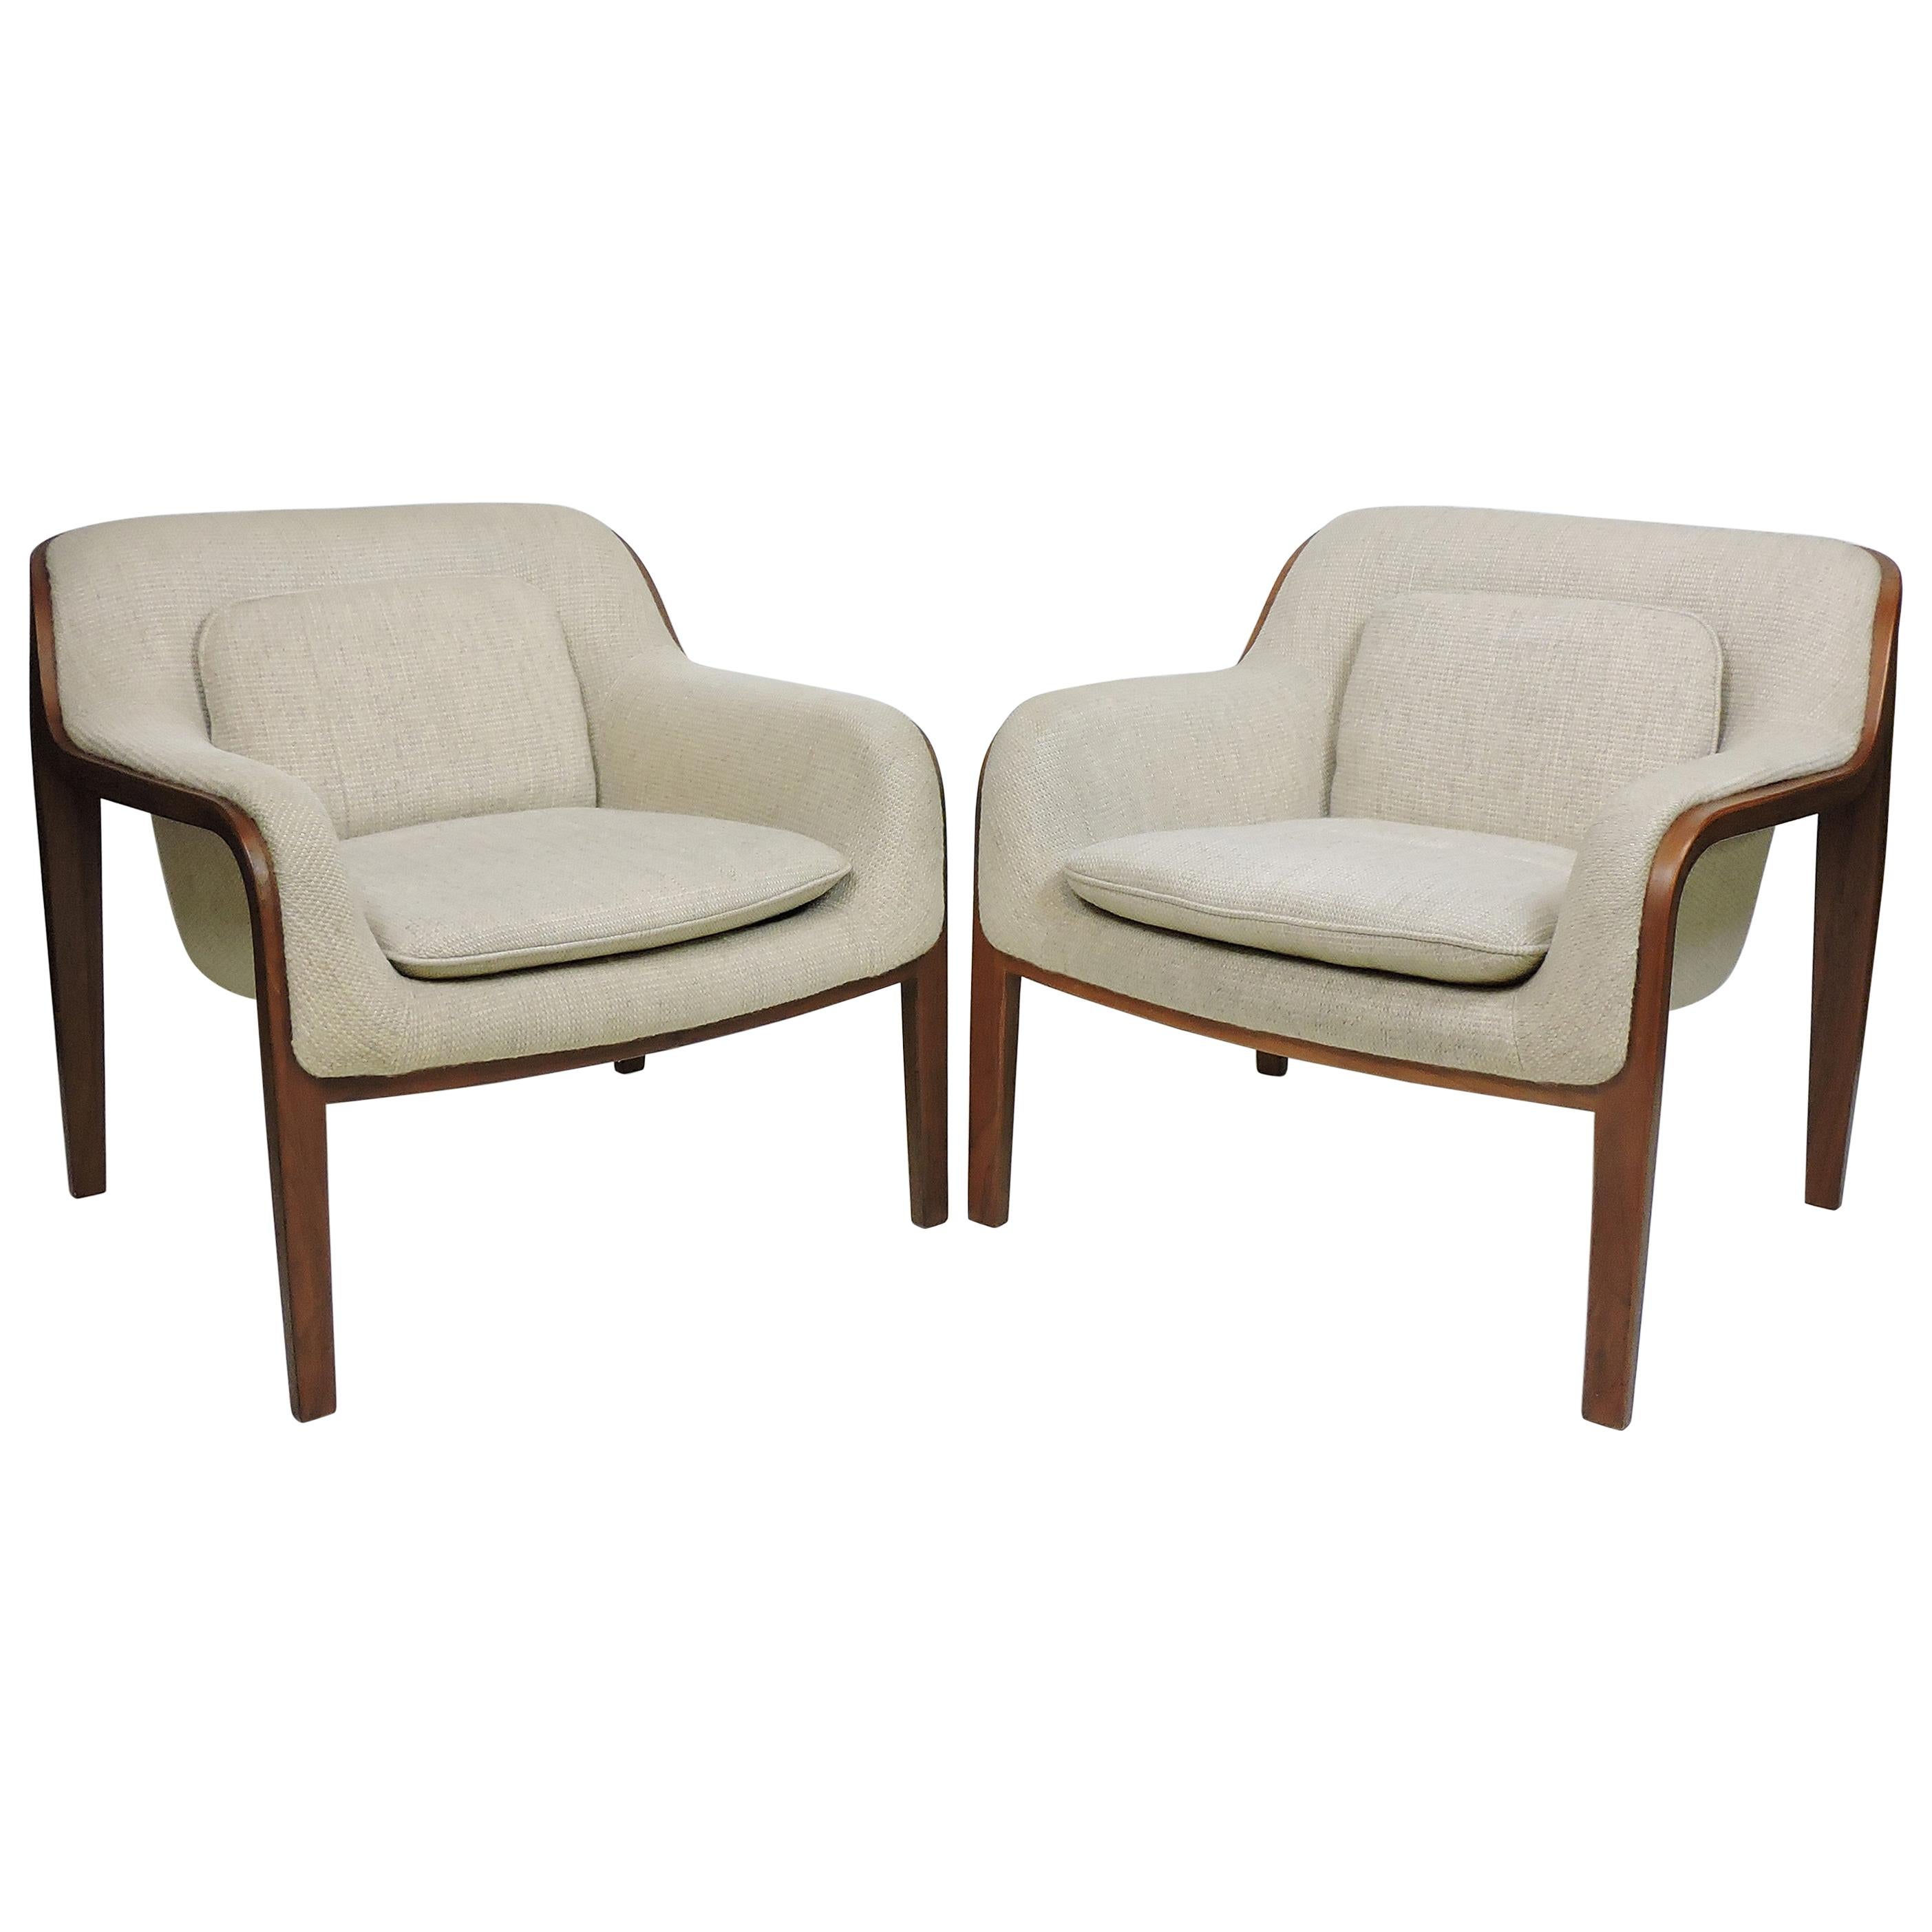 Pair of Bill Stephens Mid-Century Modern Bentwood Lounge Chairs for Knoll